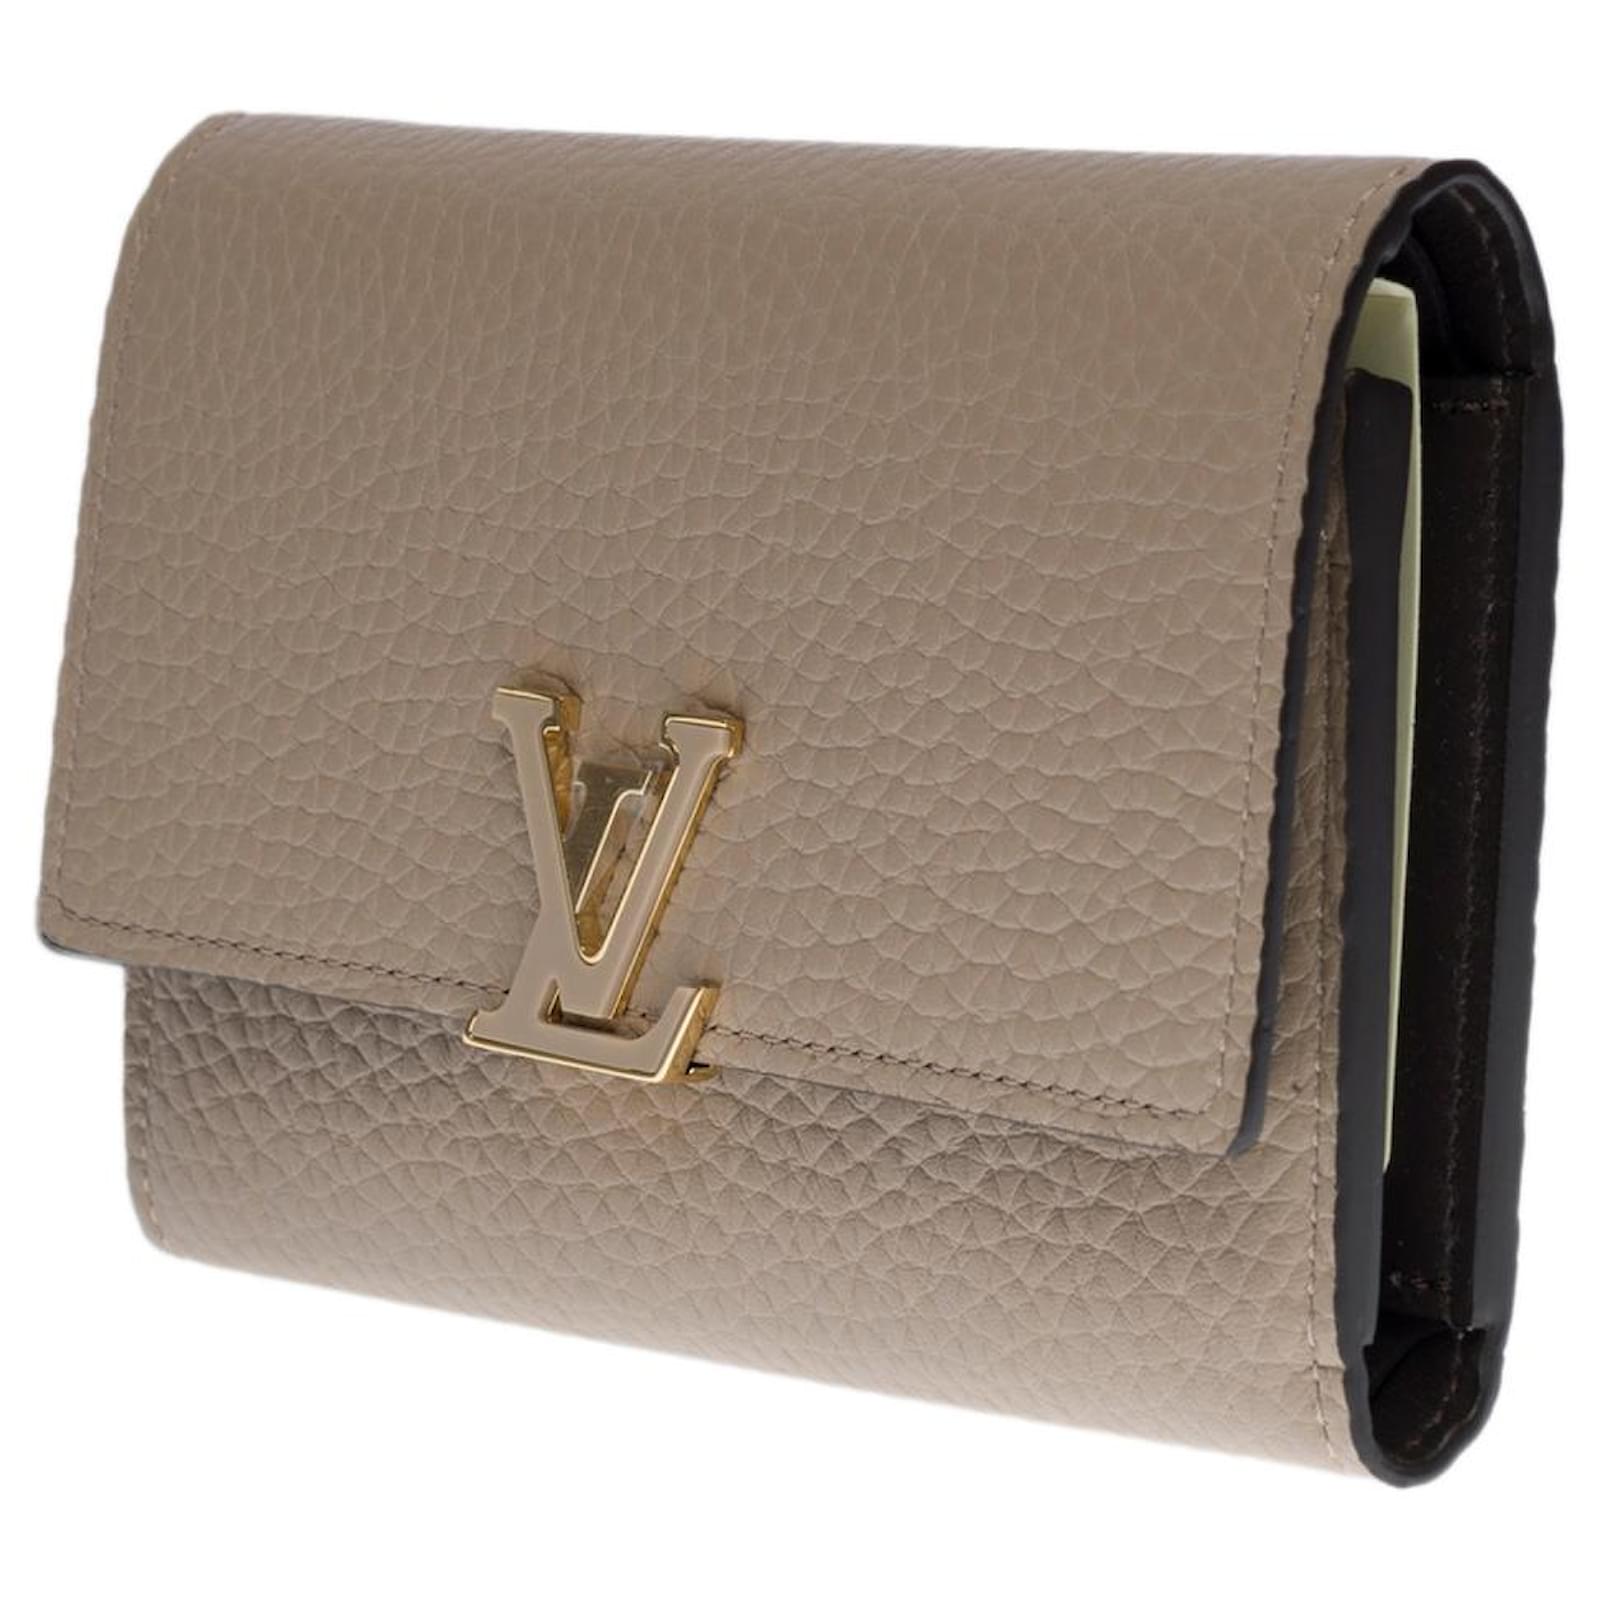 Brand New Louis Vuitton Capucines Compact Wallet in Galet Taurillon leather  at 1stDibs  capucine compact wallet, capucines compact wallet louis vuitton,  lv capucines compact wallet